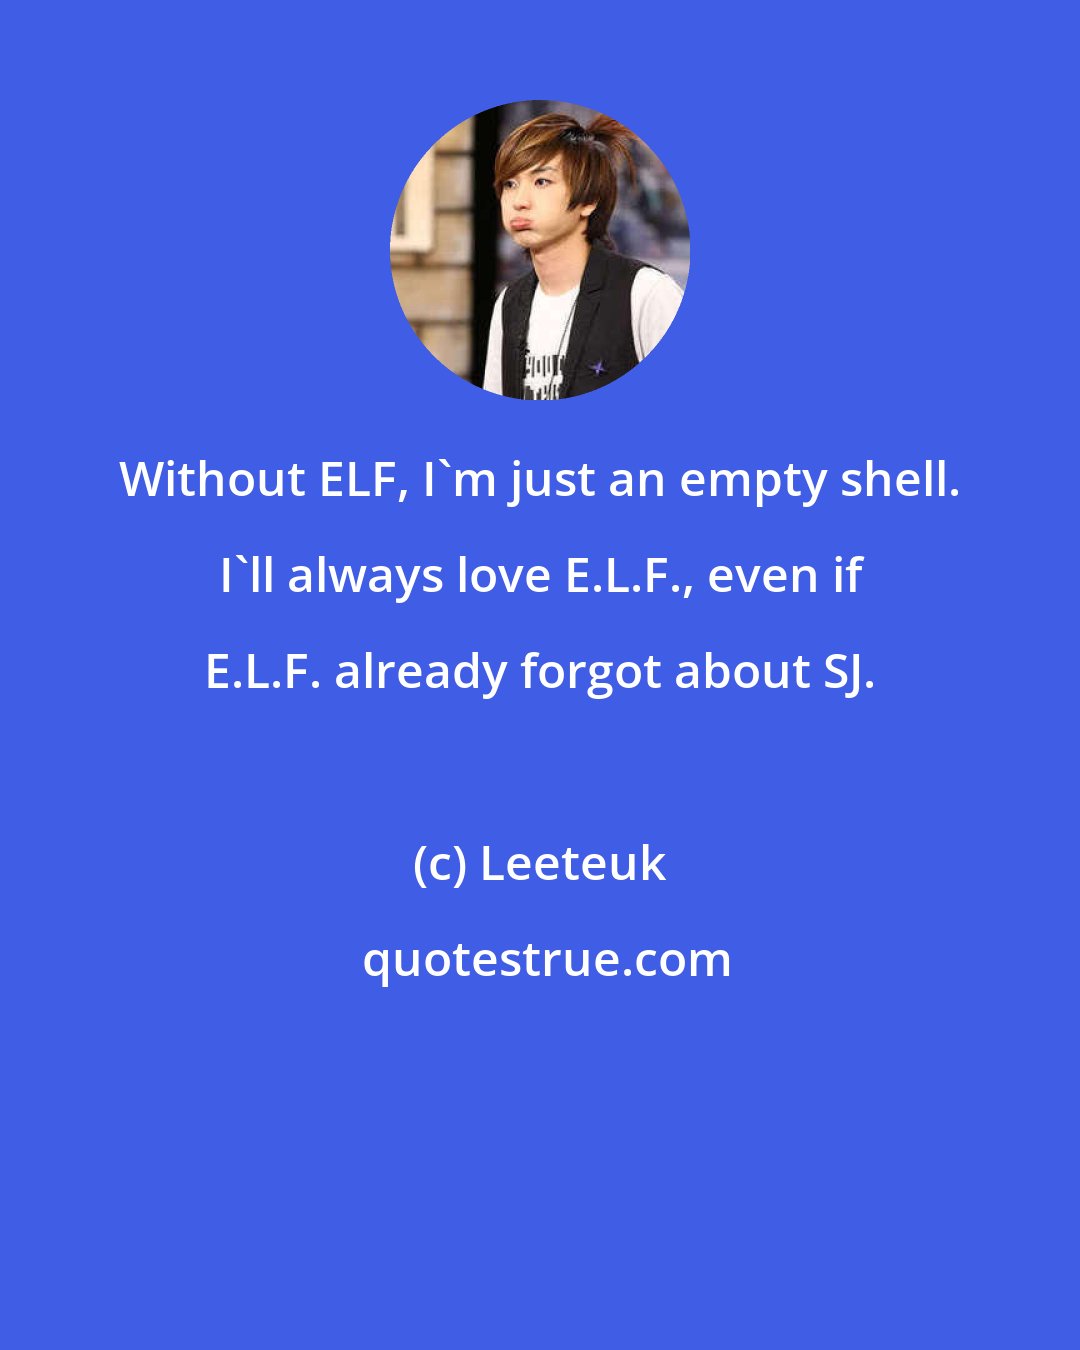 Leeteuk: Without ELF, I'm just an empty shell. I'll always love E.L.F., even if E.L.F. already forgot about SJ.